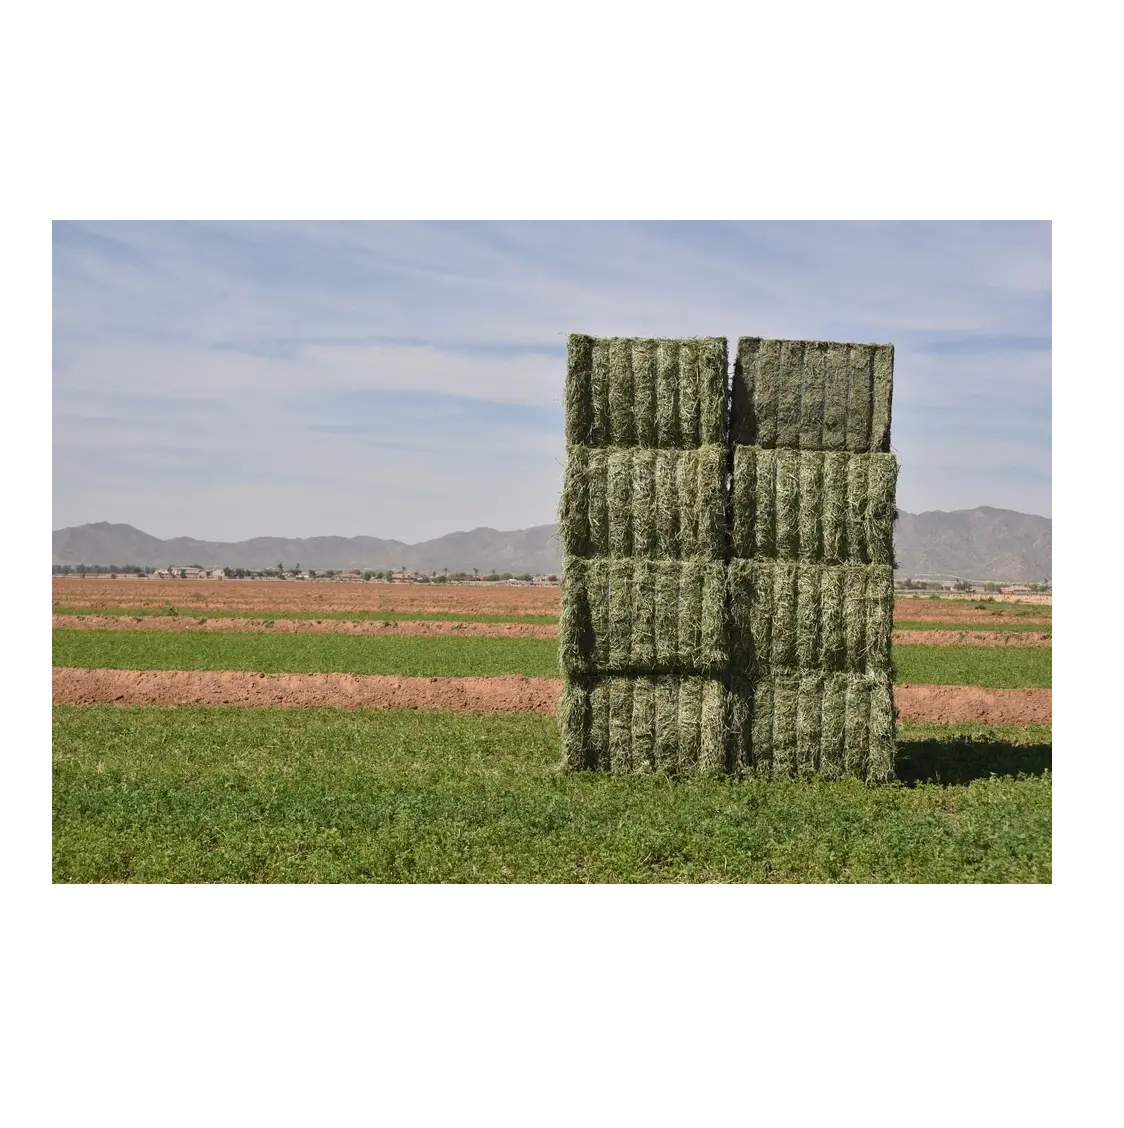 Alfalfa for feeding animals for cattle and other farm animals great quality from manufacturer alfalfa hay for sale